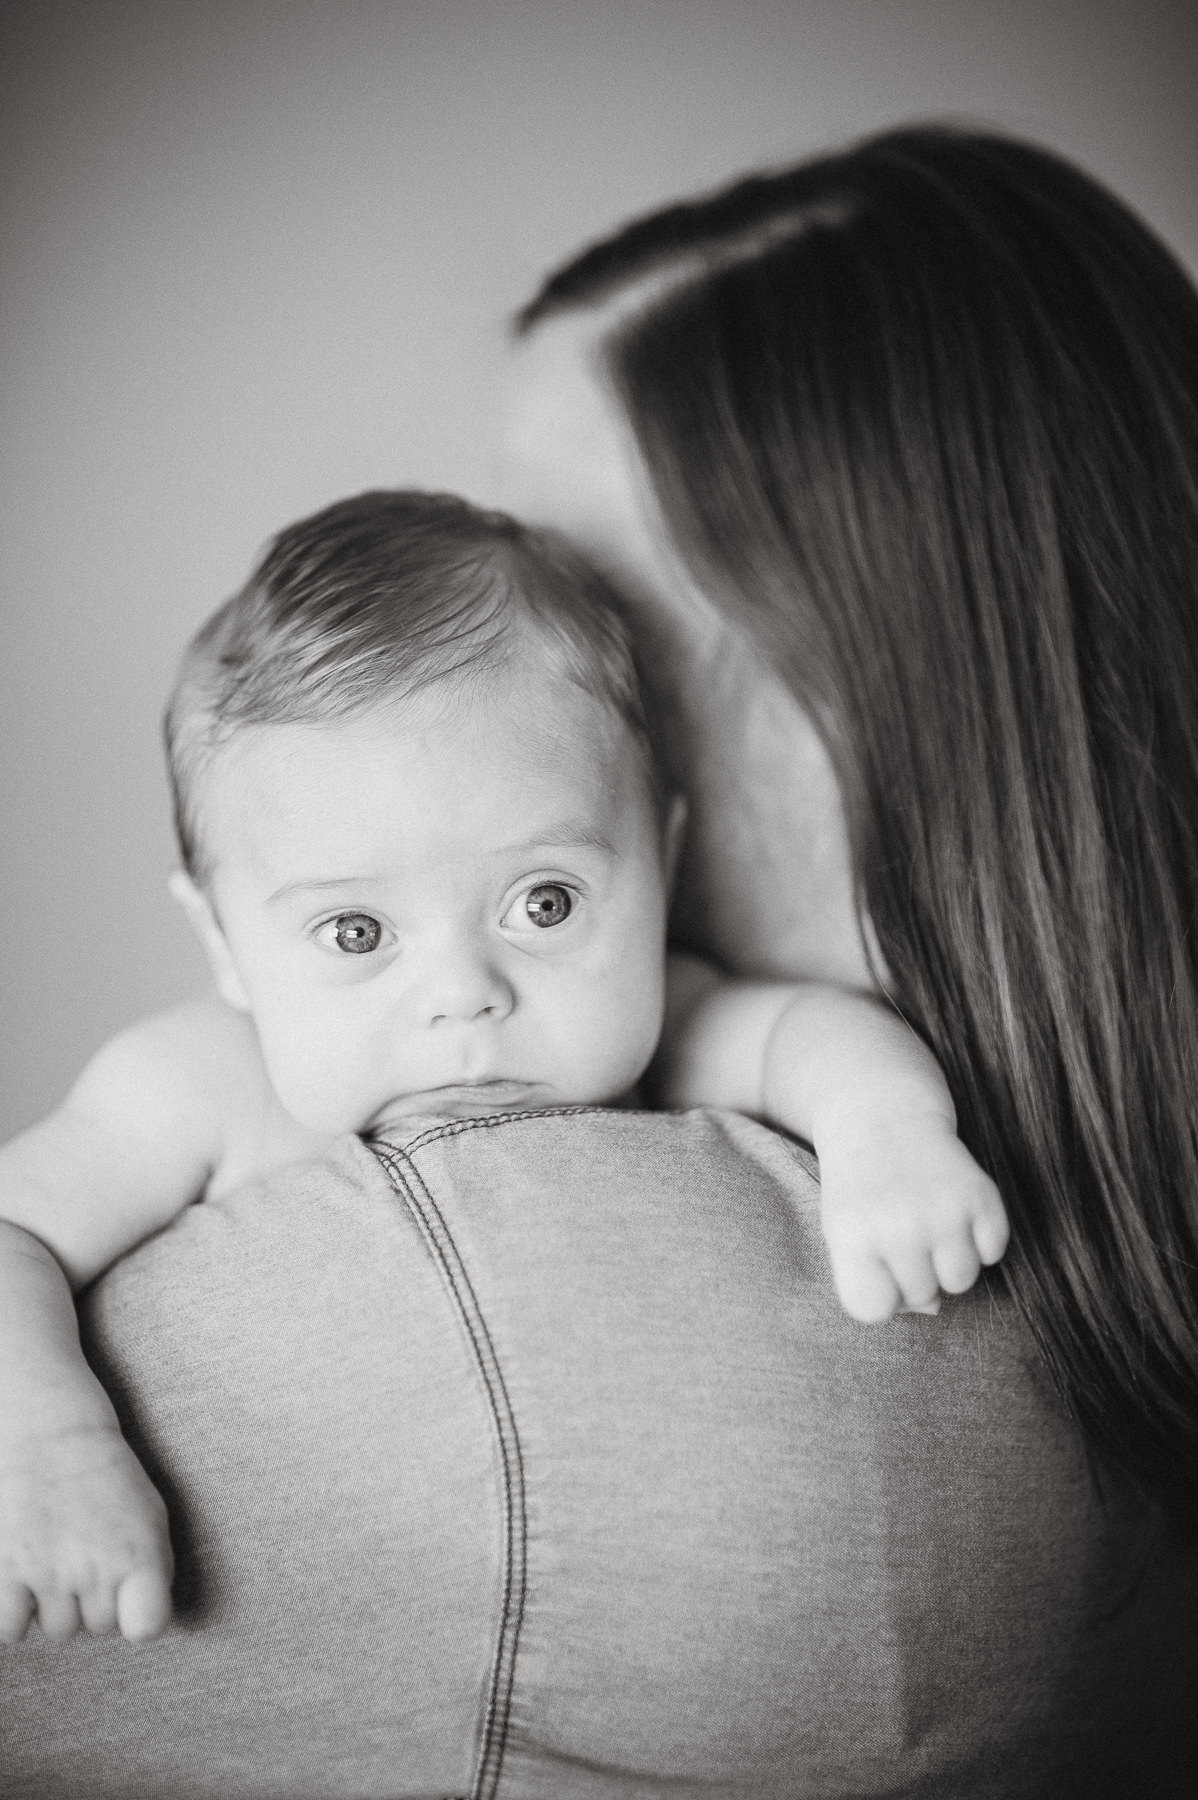 breighton-and-basette-photography-copyrighted-image-blog-croix-newborn-025.jpg